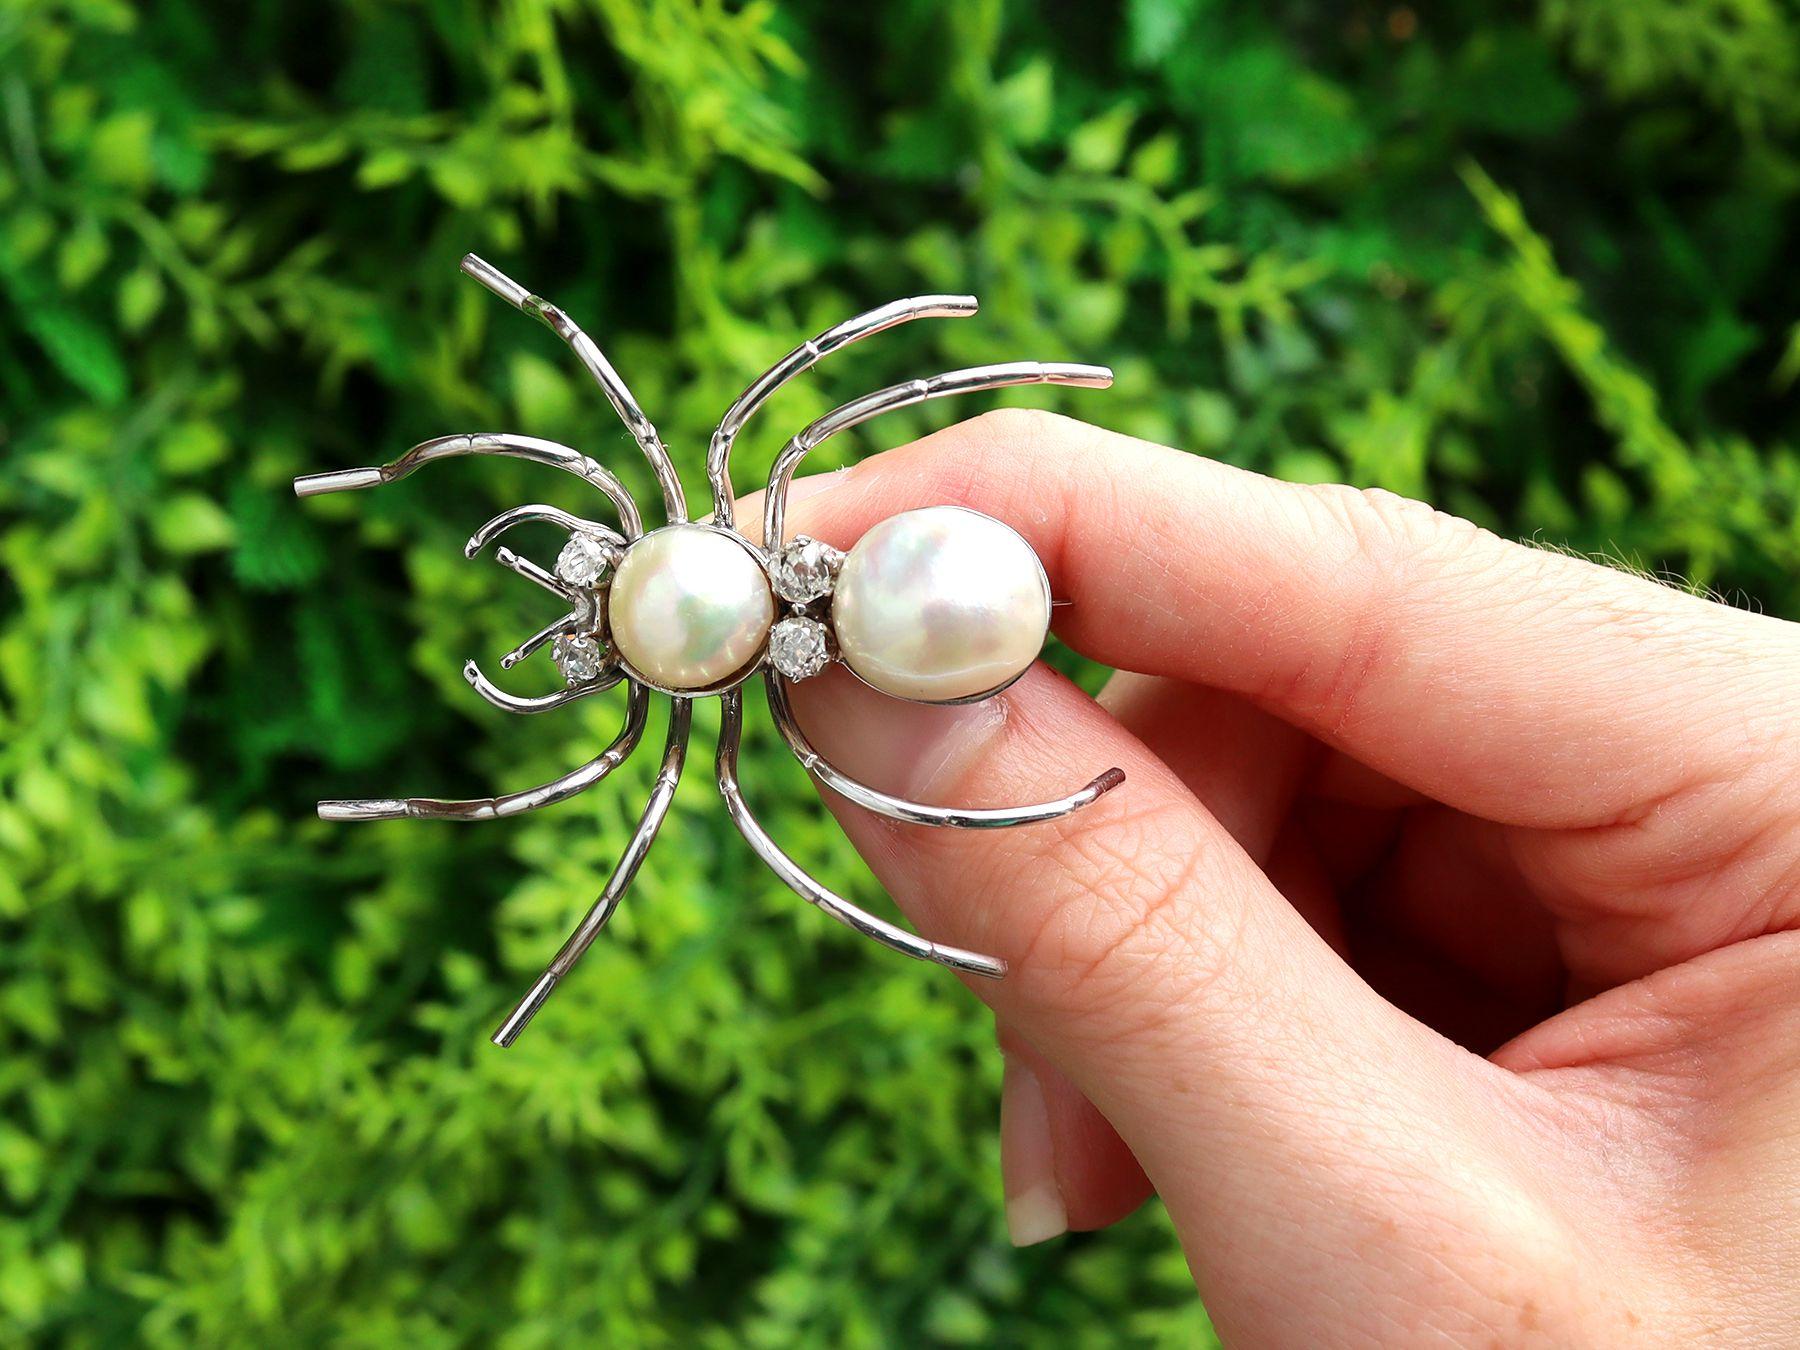 A stunning, fine and impressive cultured pearl and 0.52 carat diamond, 18 karat white gold spider brooch; part of our diverse range of antique gemstone jewellery/jewelry.

This stunning, fine and impressive antique brooch has been crafted in 18k